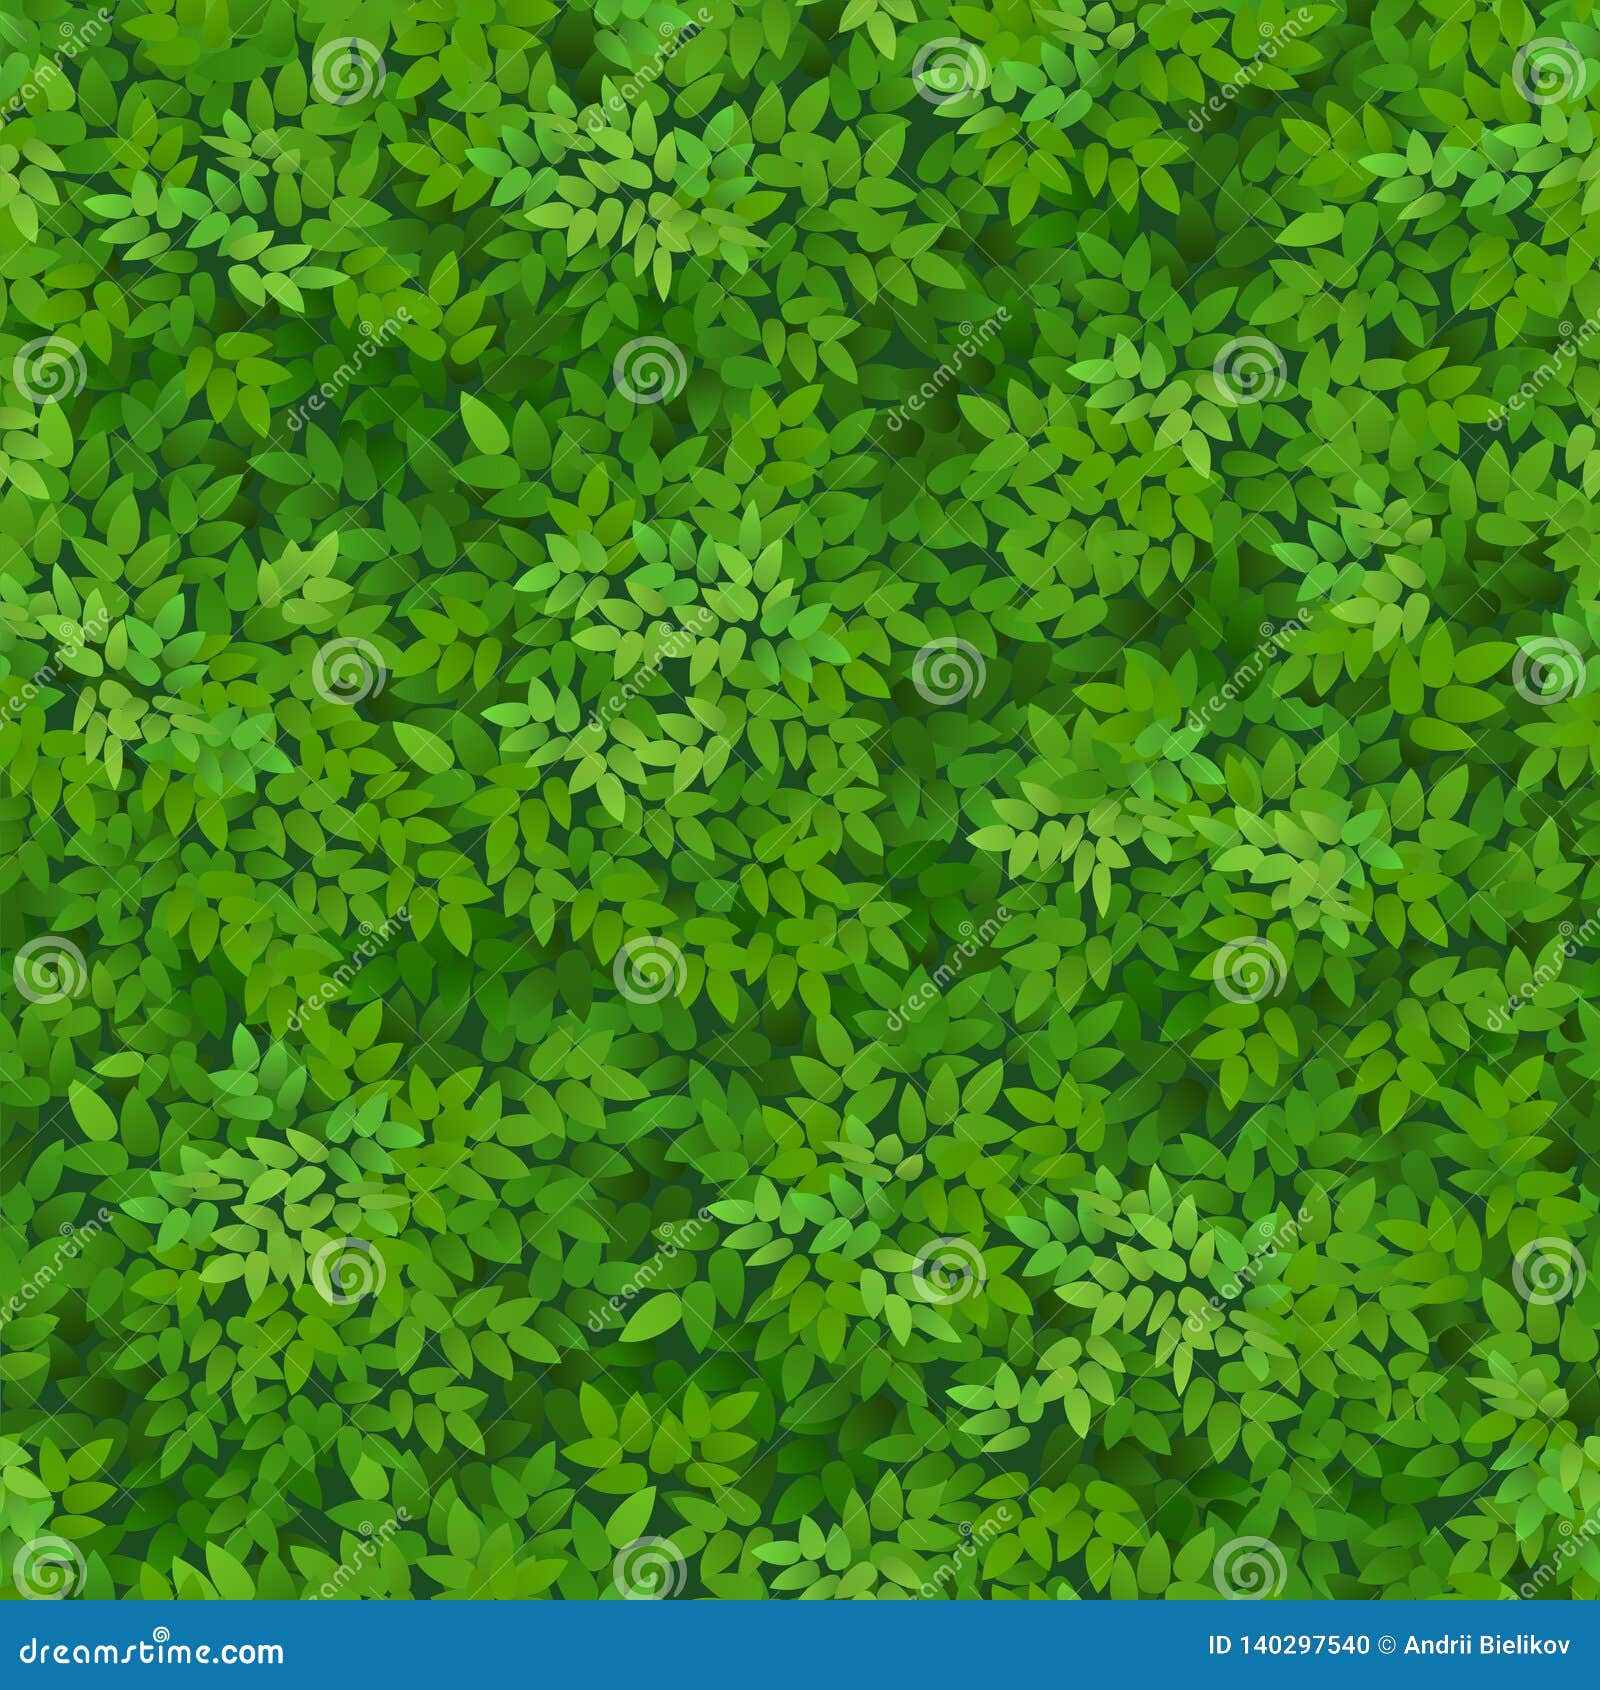 seamless green foliage pattern. green leaves background. floral decor.